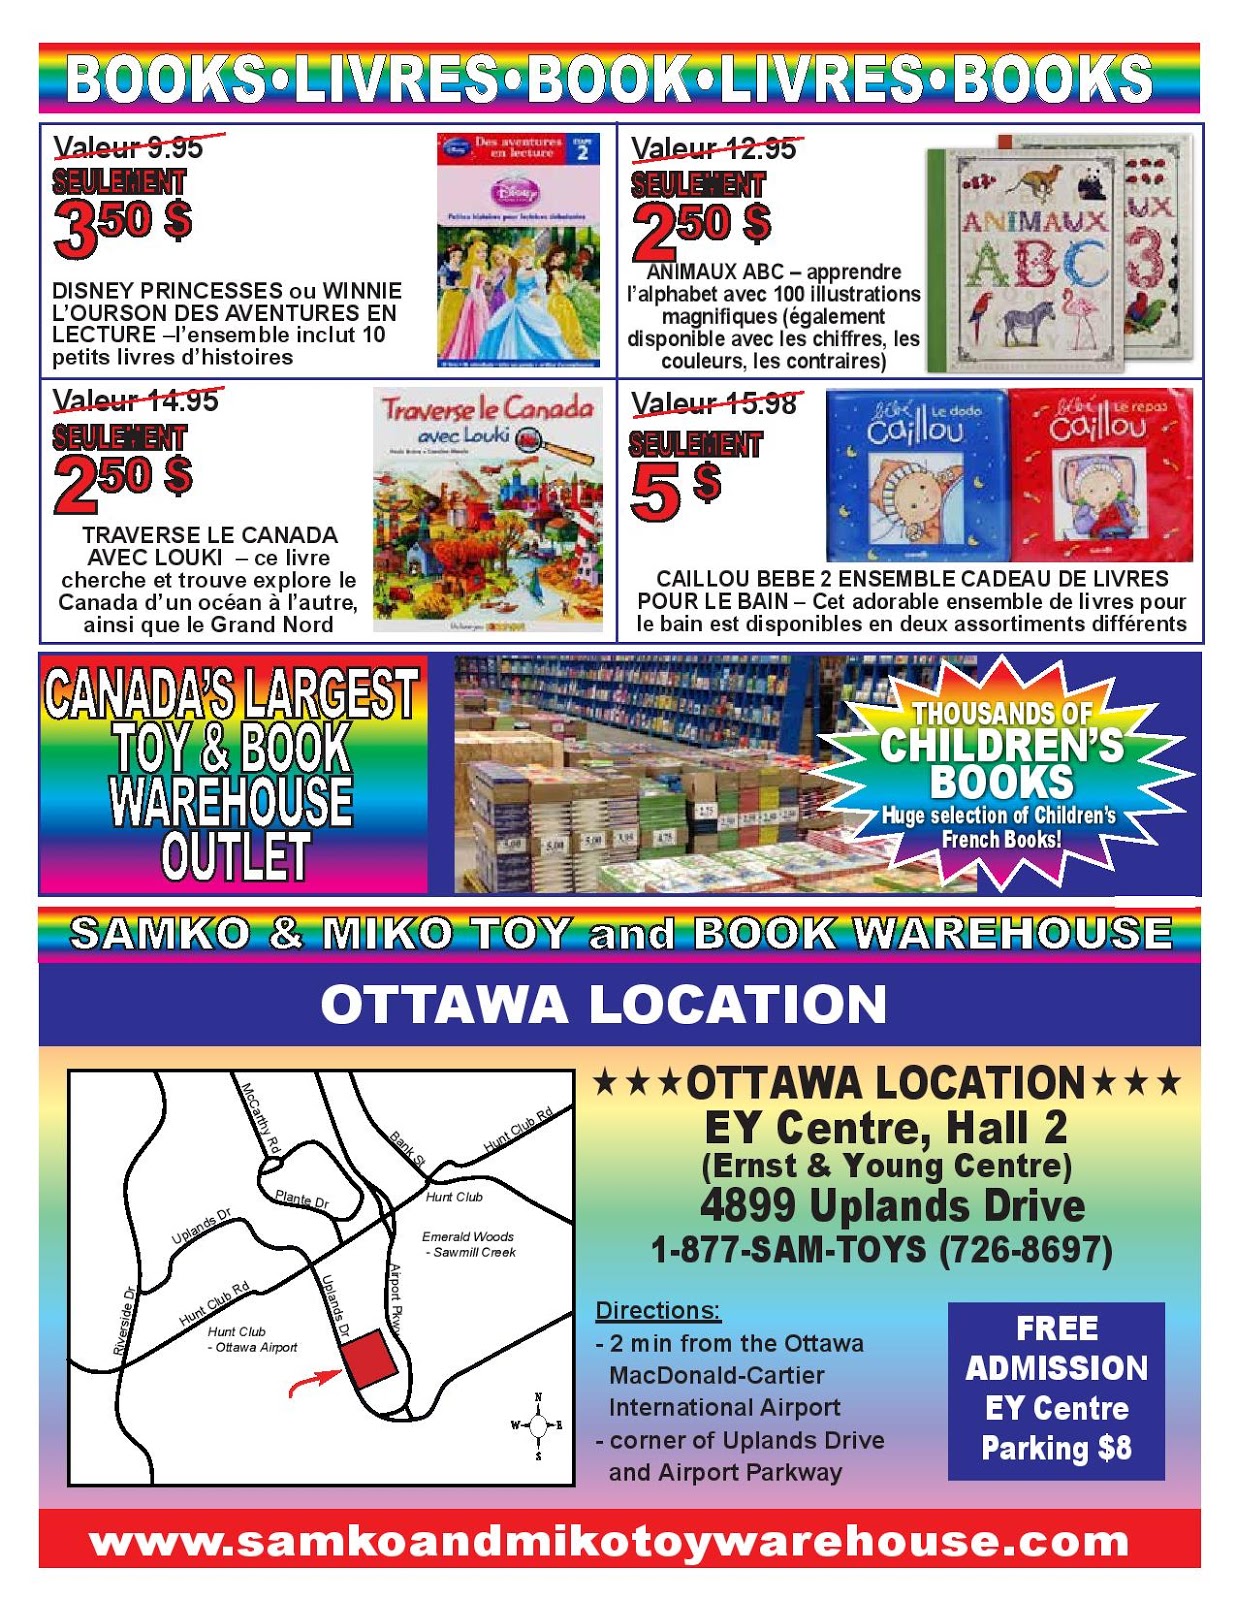 Things To Do with the Kids in Ottawa: Samko and Miko Flyer 2015